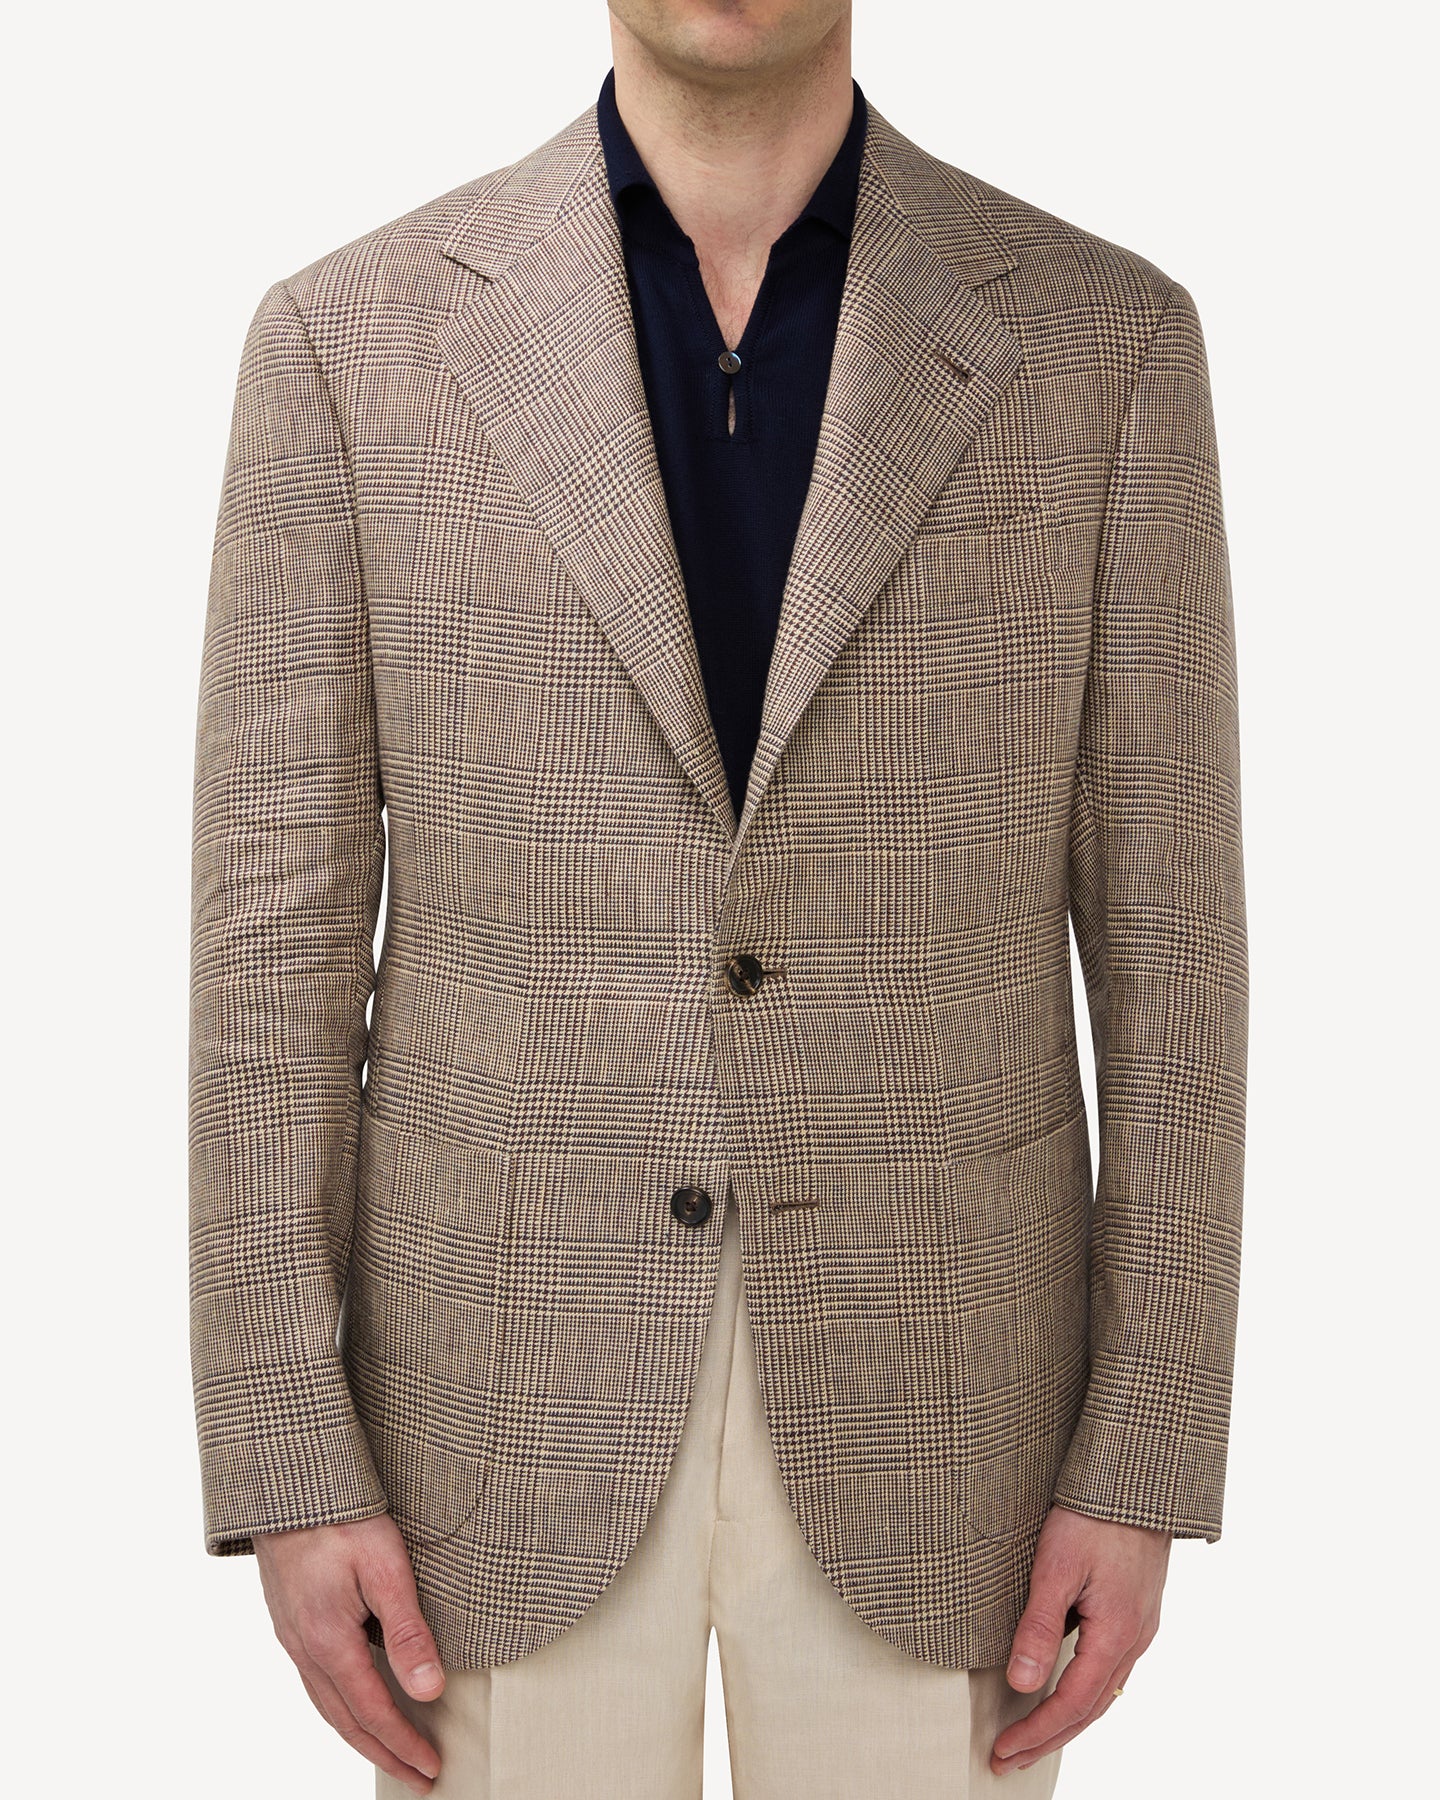 Man wearing a brown linen Prince of Wales sport coat with a navy skipper polo